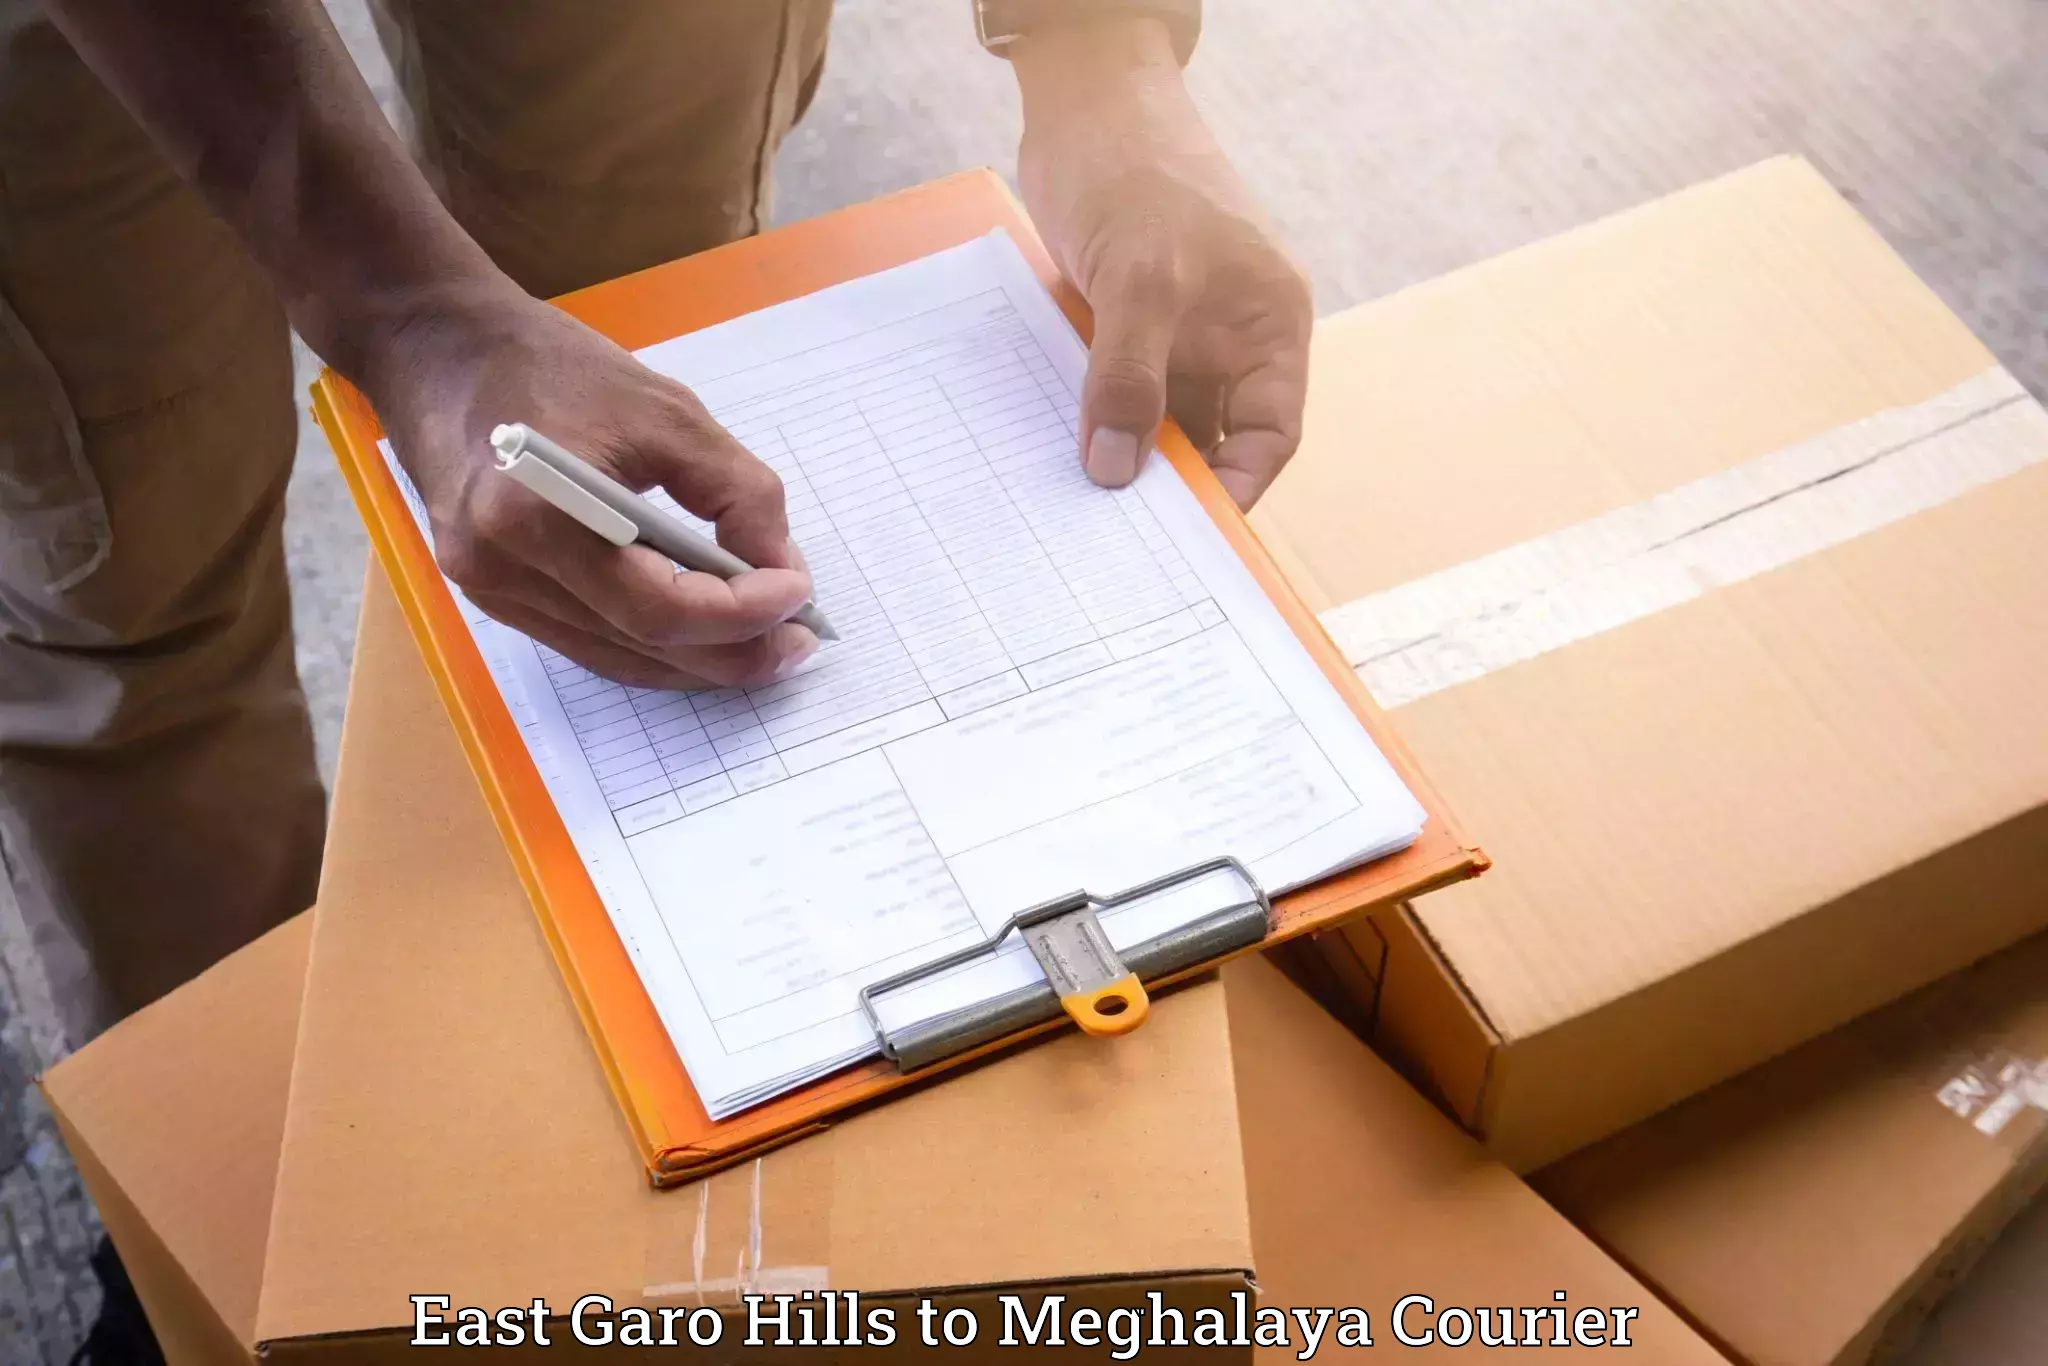 Professional moving company East Garo Hills to Umsaw